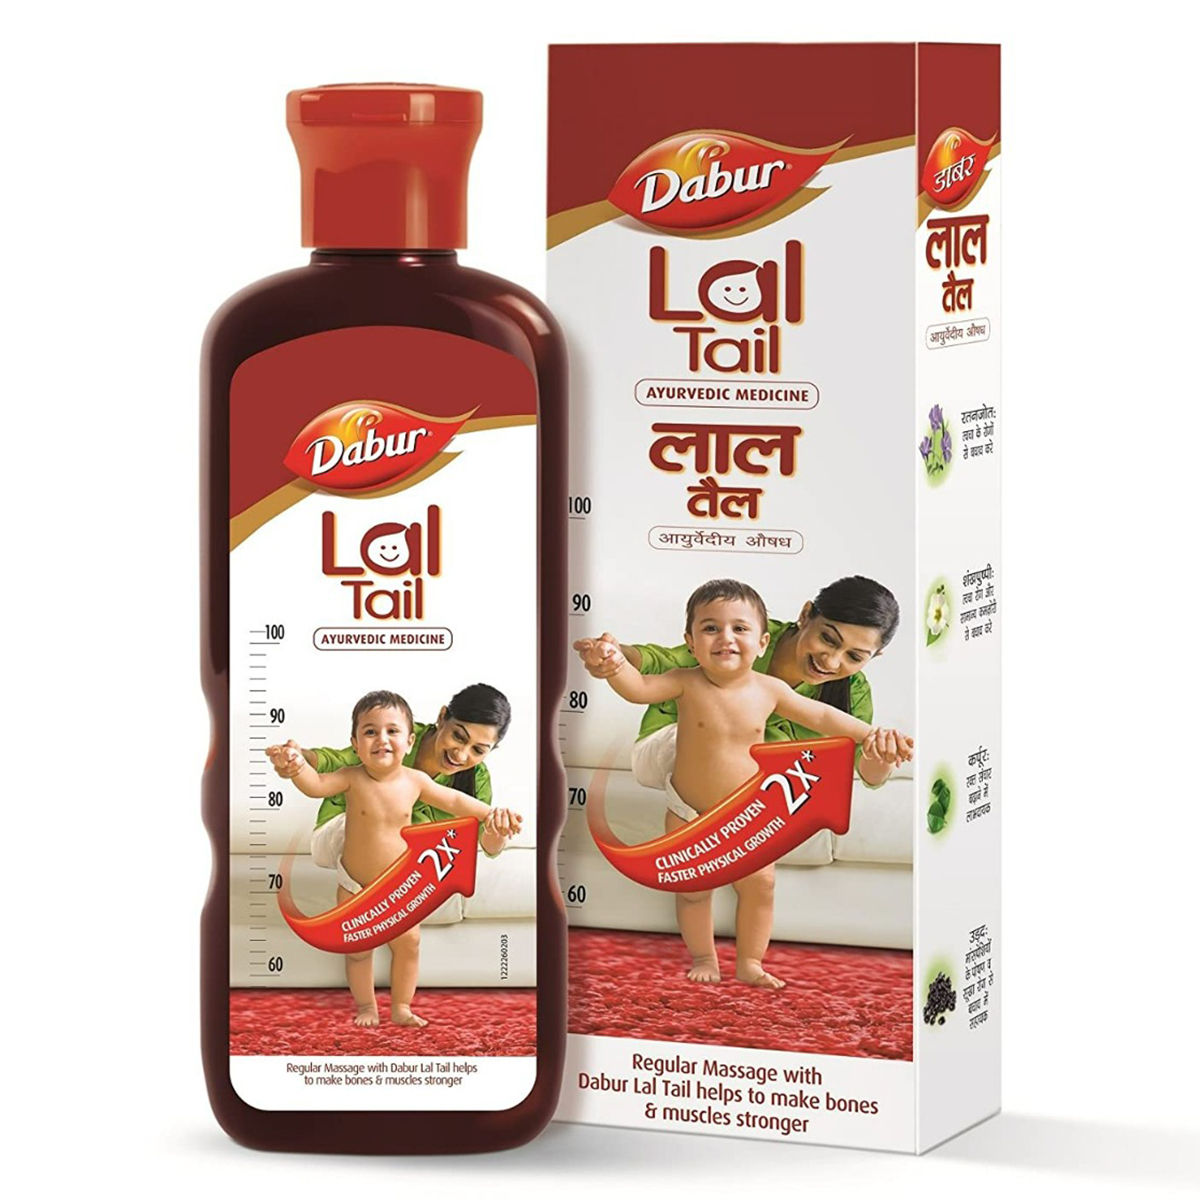 Dabur Lal Tail, 50 ml Price, Uses, Side Effects, Composition